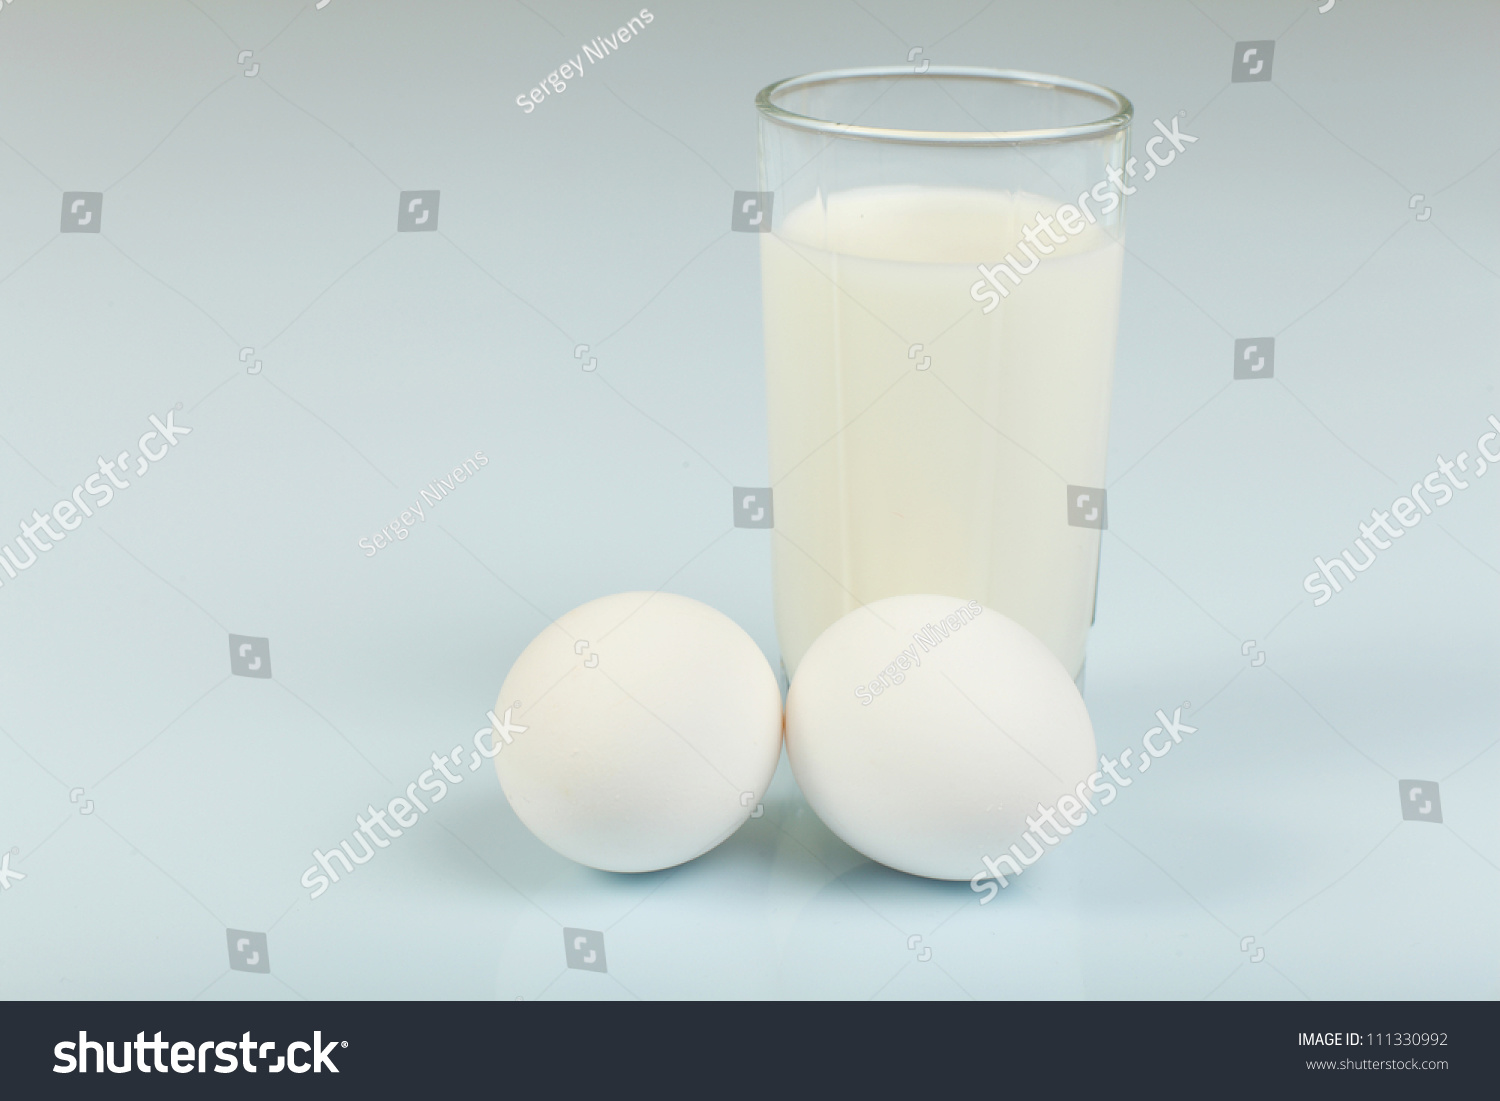 Milk in a glass jar and eggs on the table #111330992